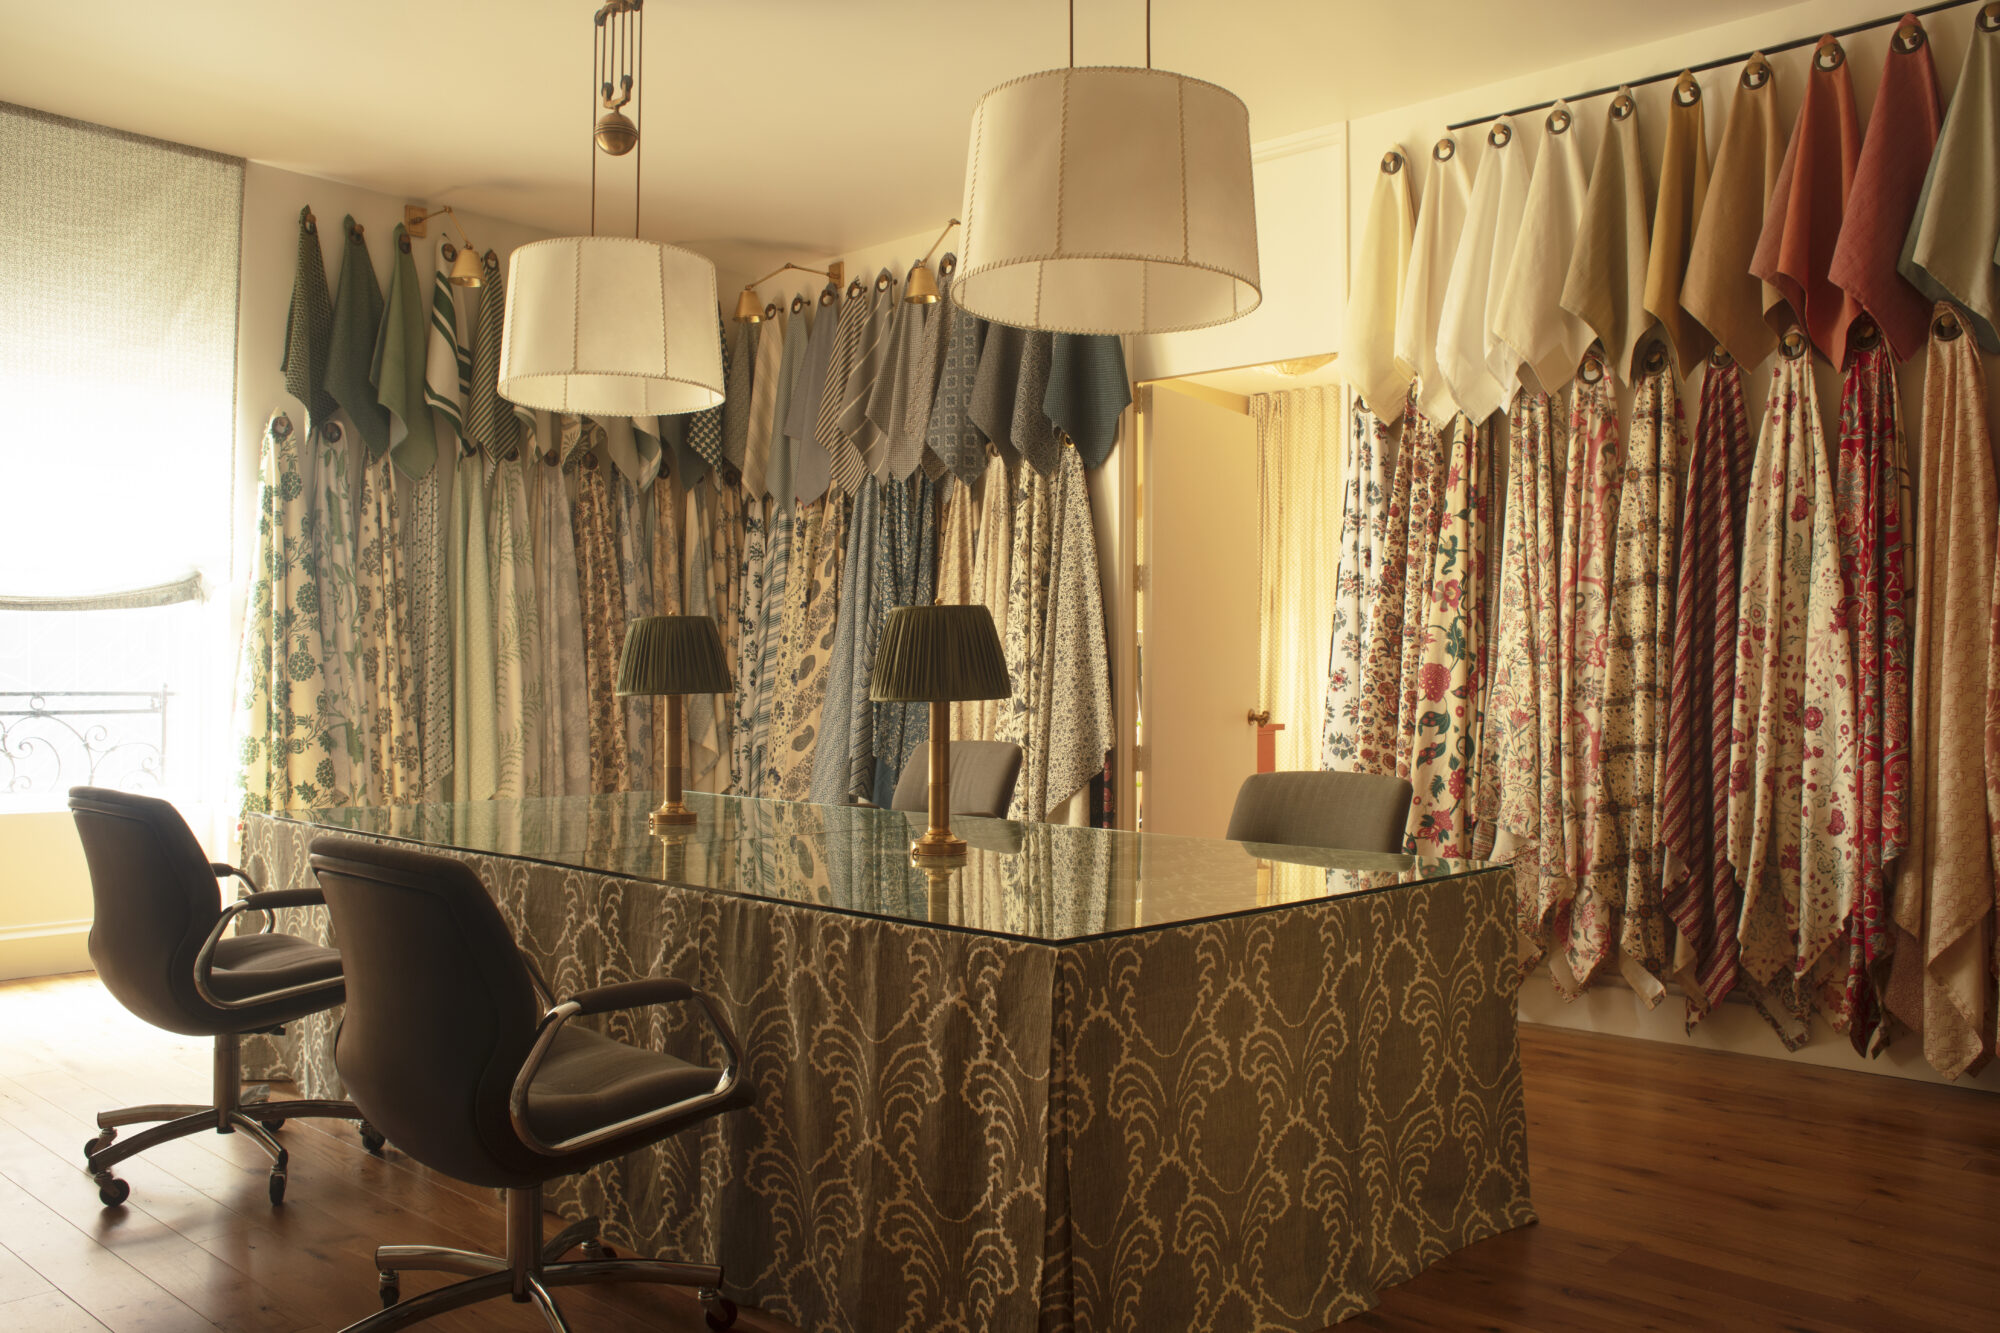 Drapes of patterned linens on display on the walls of a room with a skirted table at Soane Britain showroom